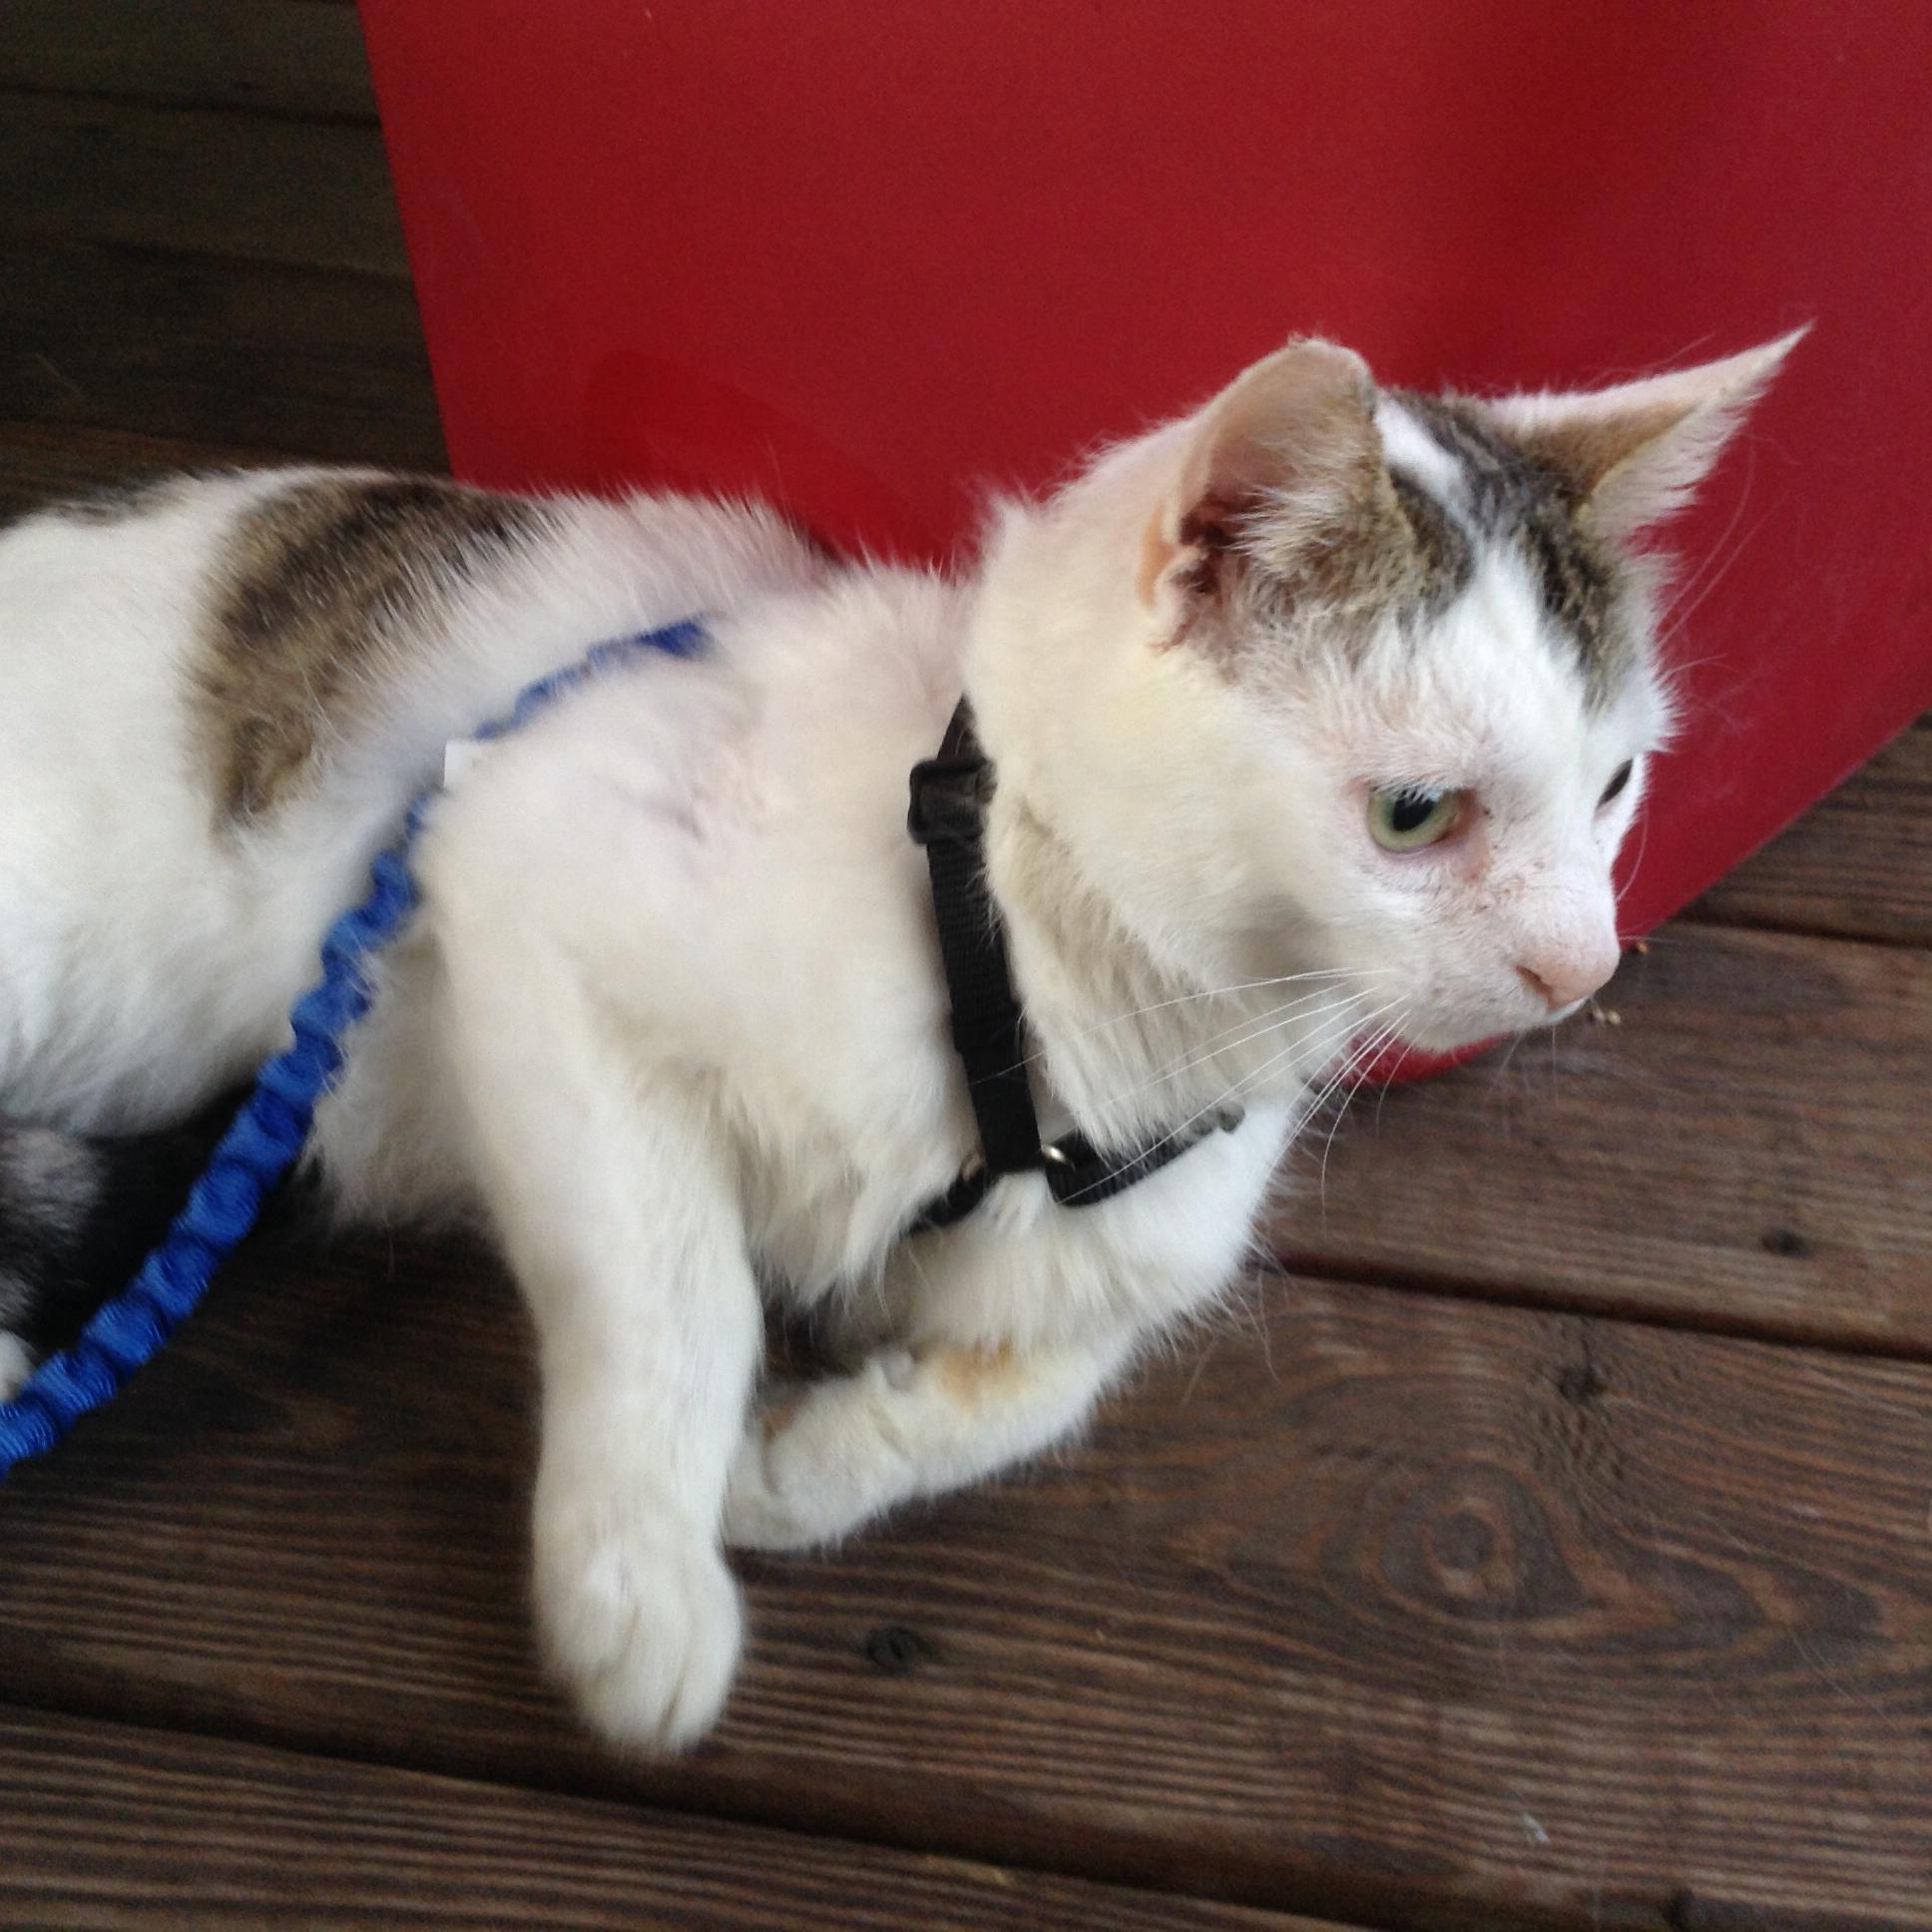 Wearing his harness and leash.